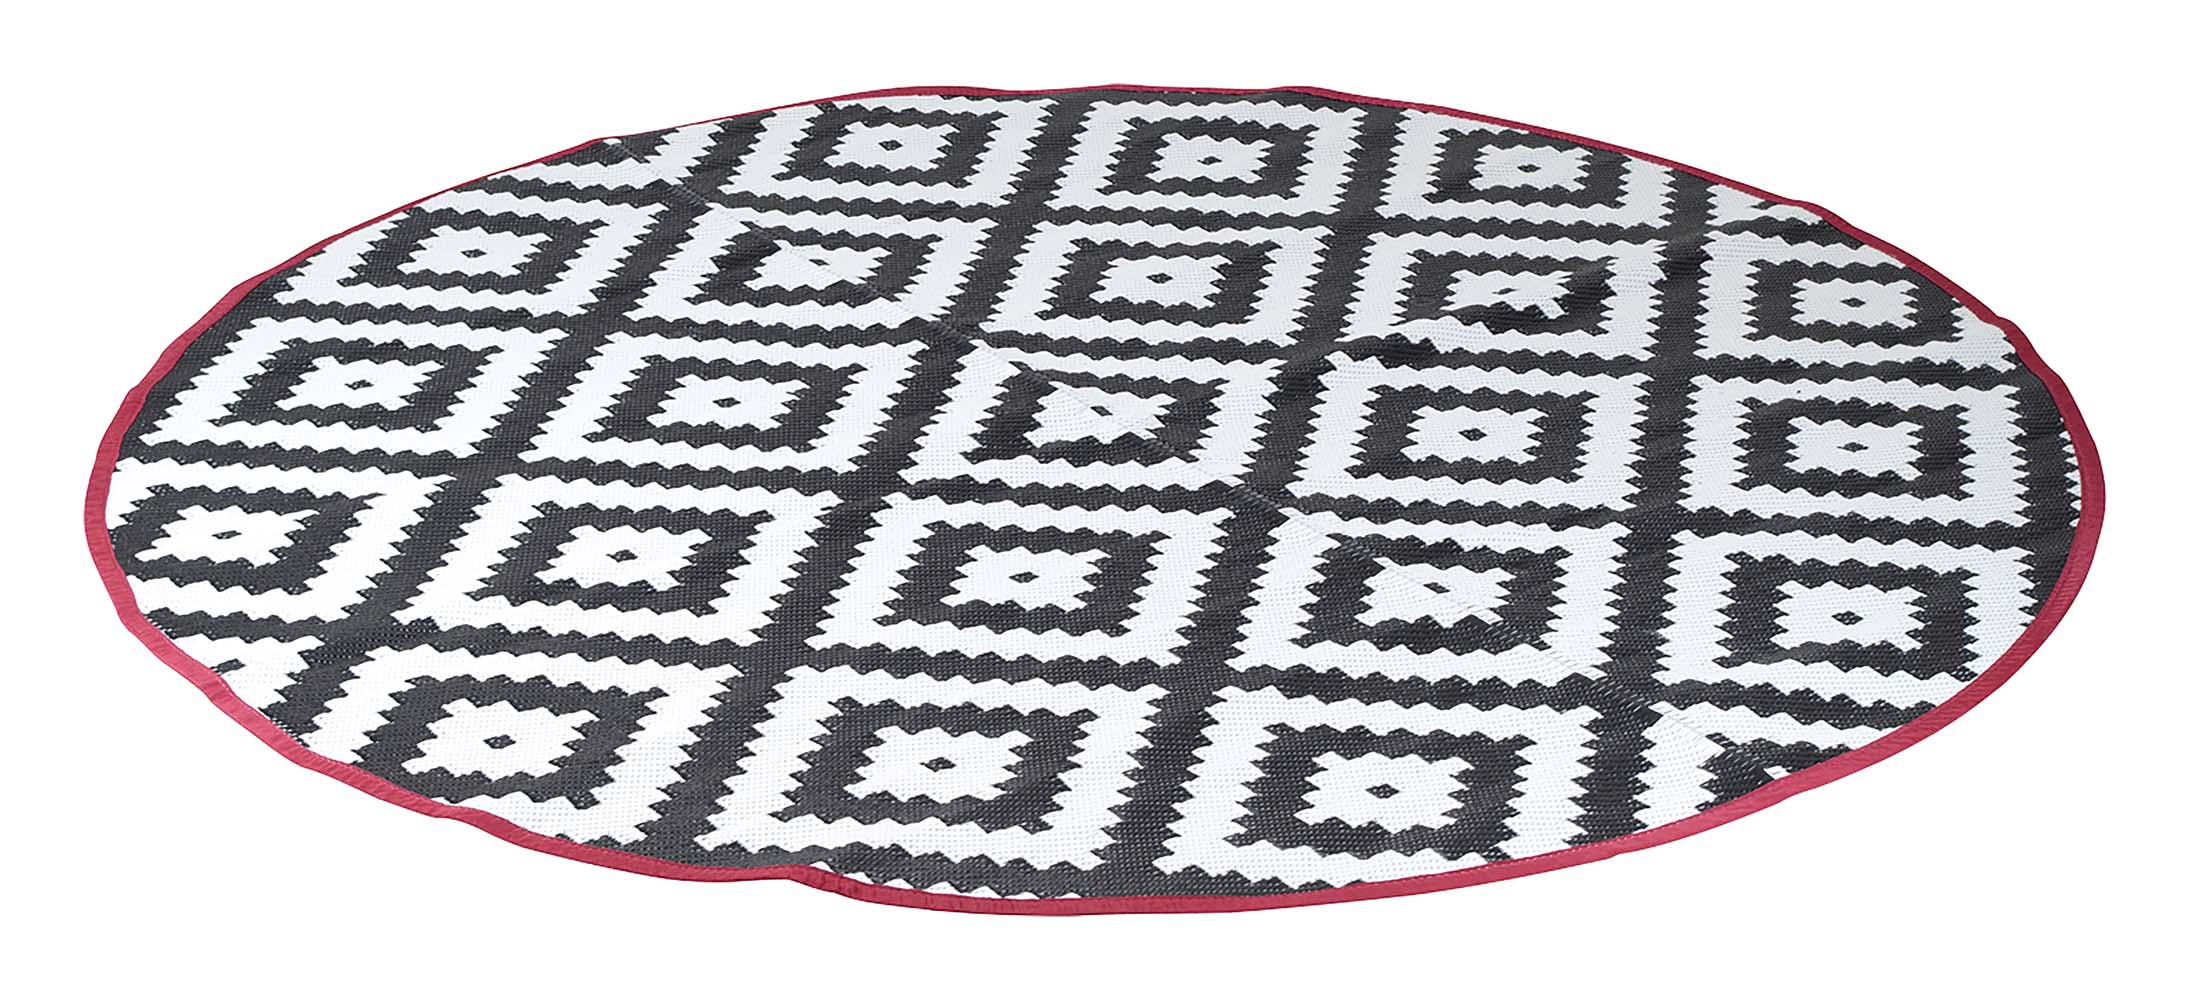 Bo-Camp - Urban Outdoor collection - Chill mat - Falconwood - Rond - Zwart/Wit detail 2